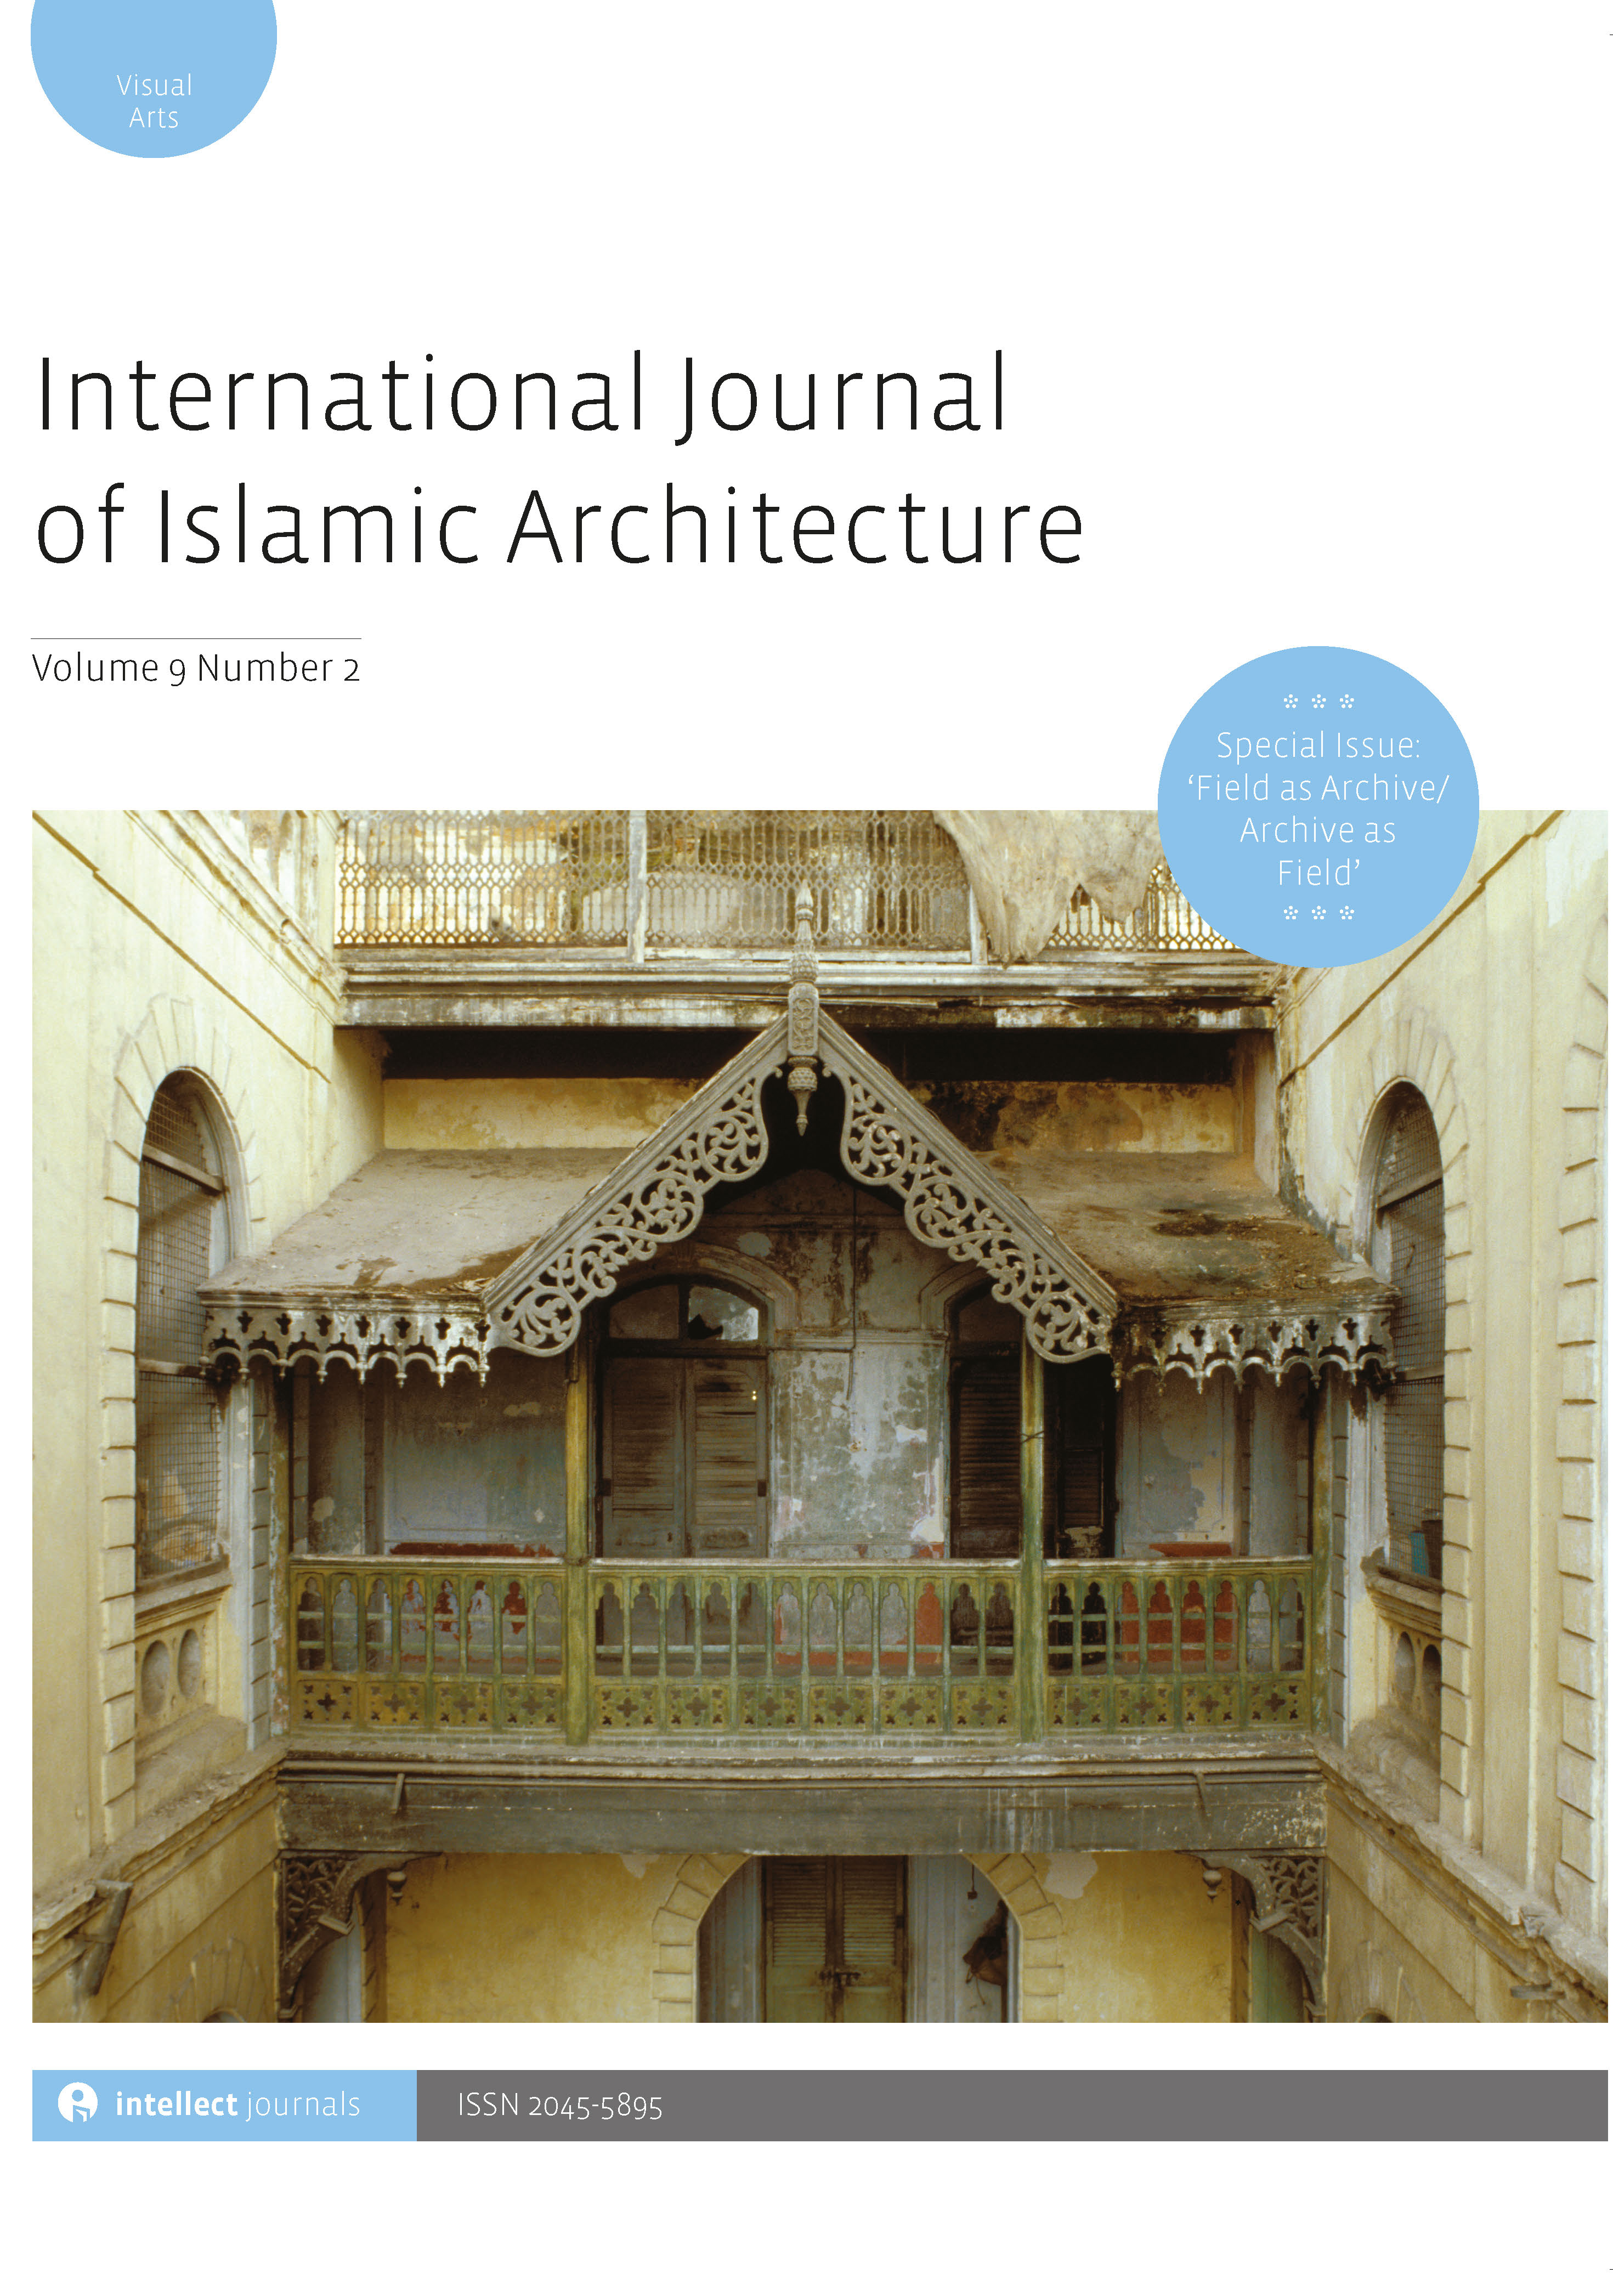 Eray Çaylı - <div style="text-align: justify;">This article introduces the special issue 'Field as Archive / Archive as Field': a set of critical reflections on archival research and fieldwork in academic studies focused on space. The special issue asks, how might the experience of carrying out research in the archive and the field, with all its contingencies and errancies, be taken seriously as empirical material in its own right? In other words, rather than reducing the research process to an empirically insignificant instrument through which to access useable data, how could scholars and practitioners of architecture treat this work as the very stuff of the histories, theories, criticisms, and/or practices they produce? In raising these questions that remain relatively underexplored, especially in architectural research, this special issue works from the contemporary historical juncture that is marked by an increasing visibility of rhetorical and physical hostility throughout social and political affairs. Probing how this historical juncture might impact and be impacted by spatial research, contributors to the special issue explore these impacts through the markedly urban and architectural registers in which they take place, including heritage, infrastructure, displacement, housing, and protest. They, moreover, do so through a variety of contexts relevant to the journal's scope: Egypt, Zanzibar, Turkey, Greece, Iran, and Israel/Palestine.</div><div style="text-align: justify;"><br></div><div style="text-align: justify;"><br></div>